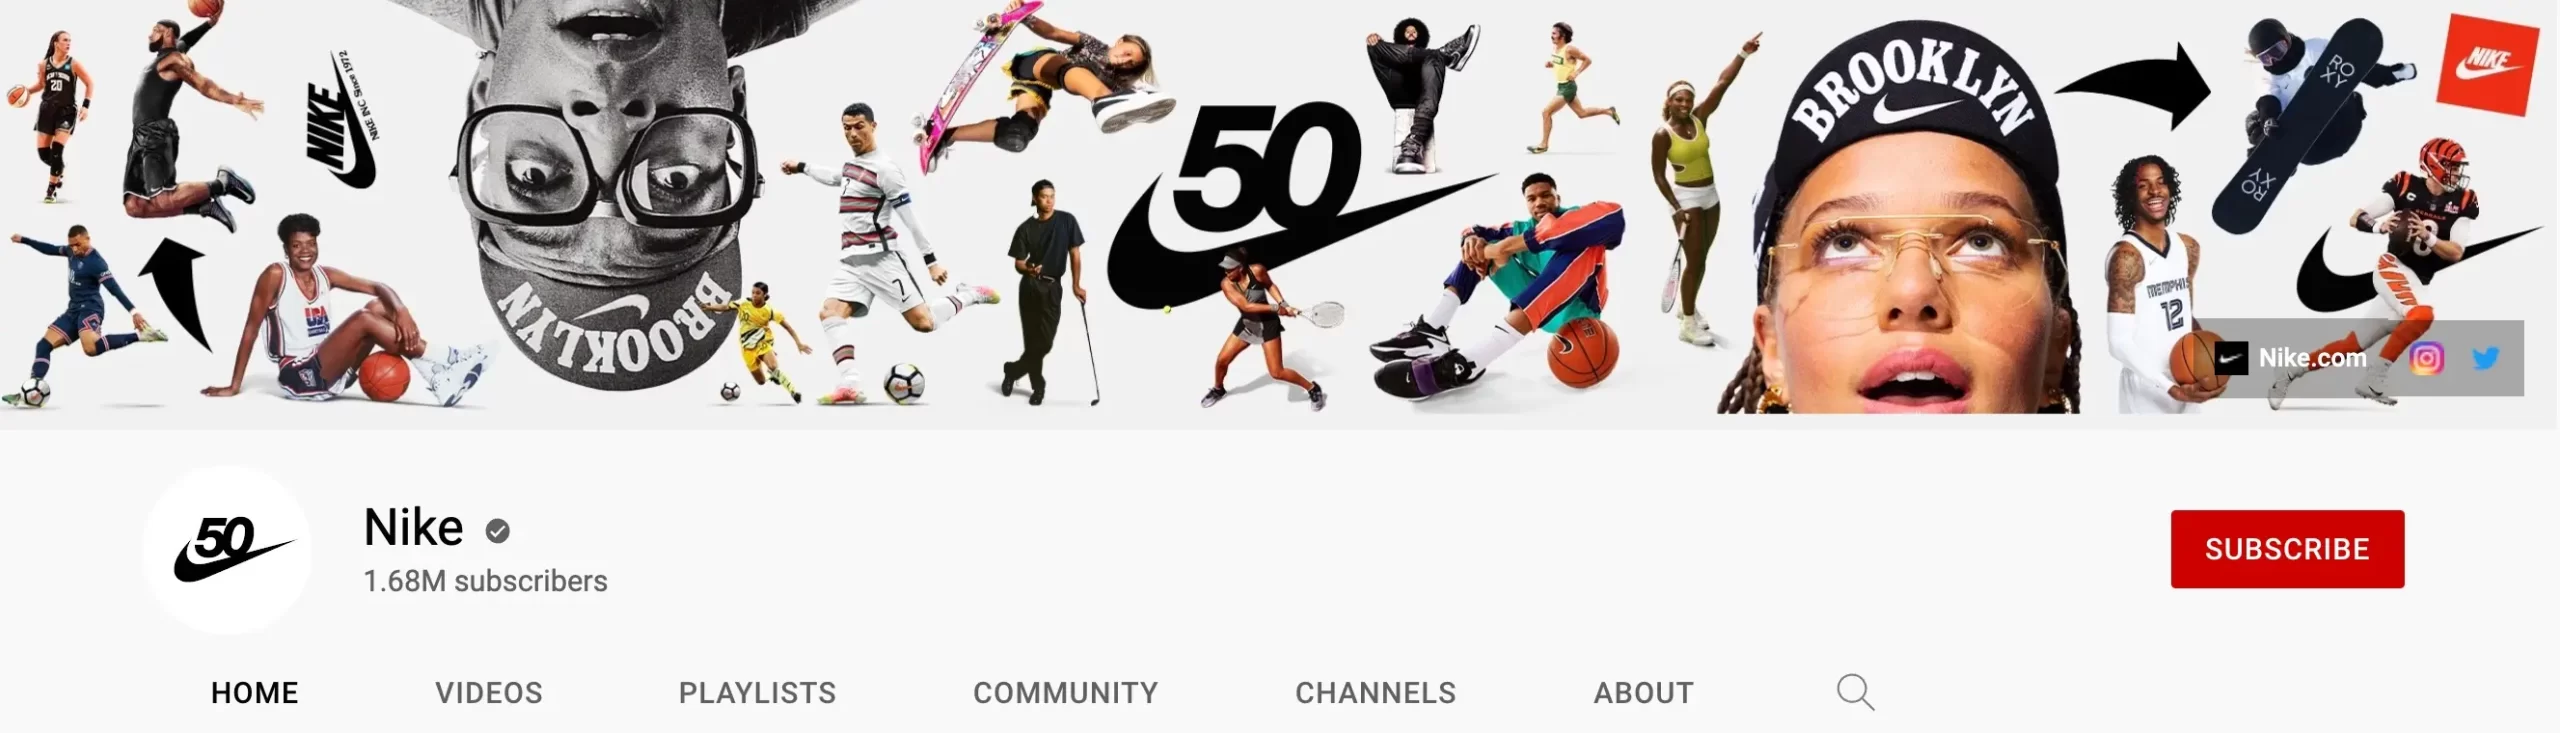 YouTube Channel Art Example for a Brand